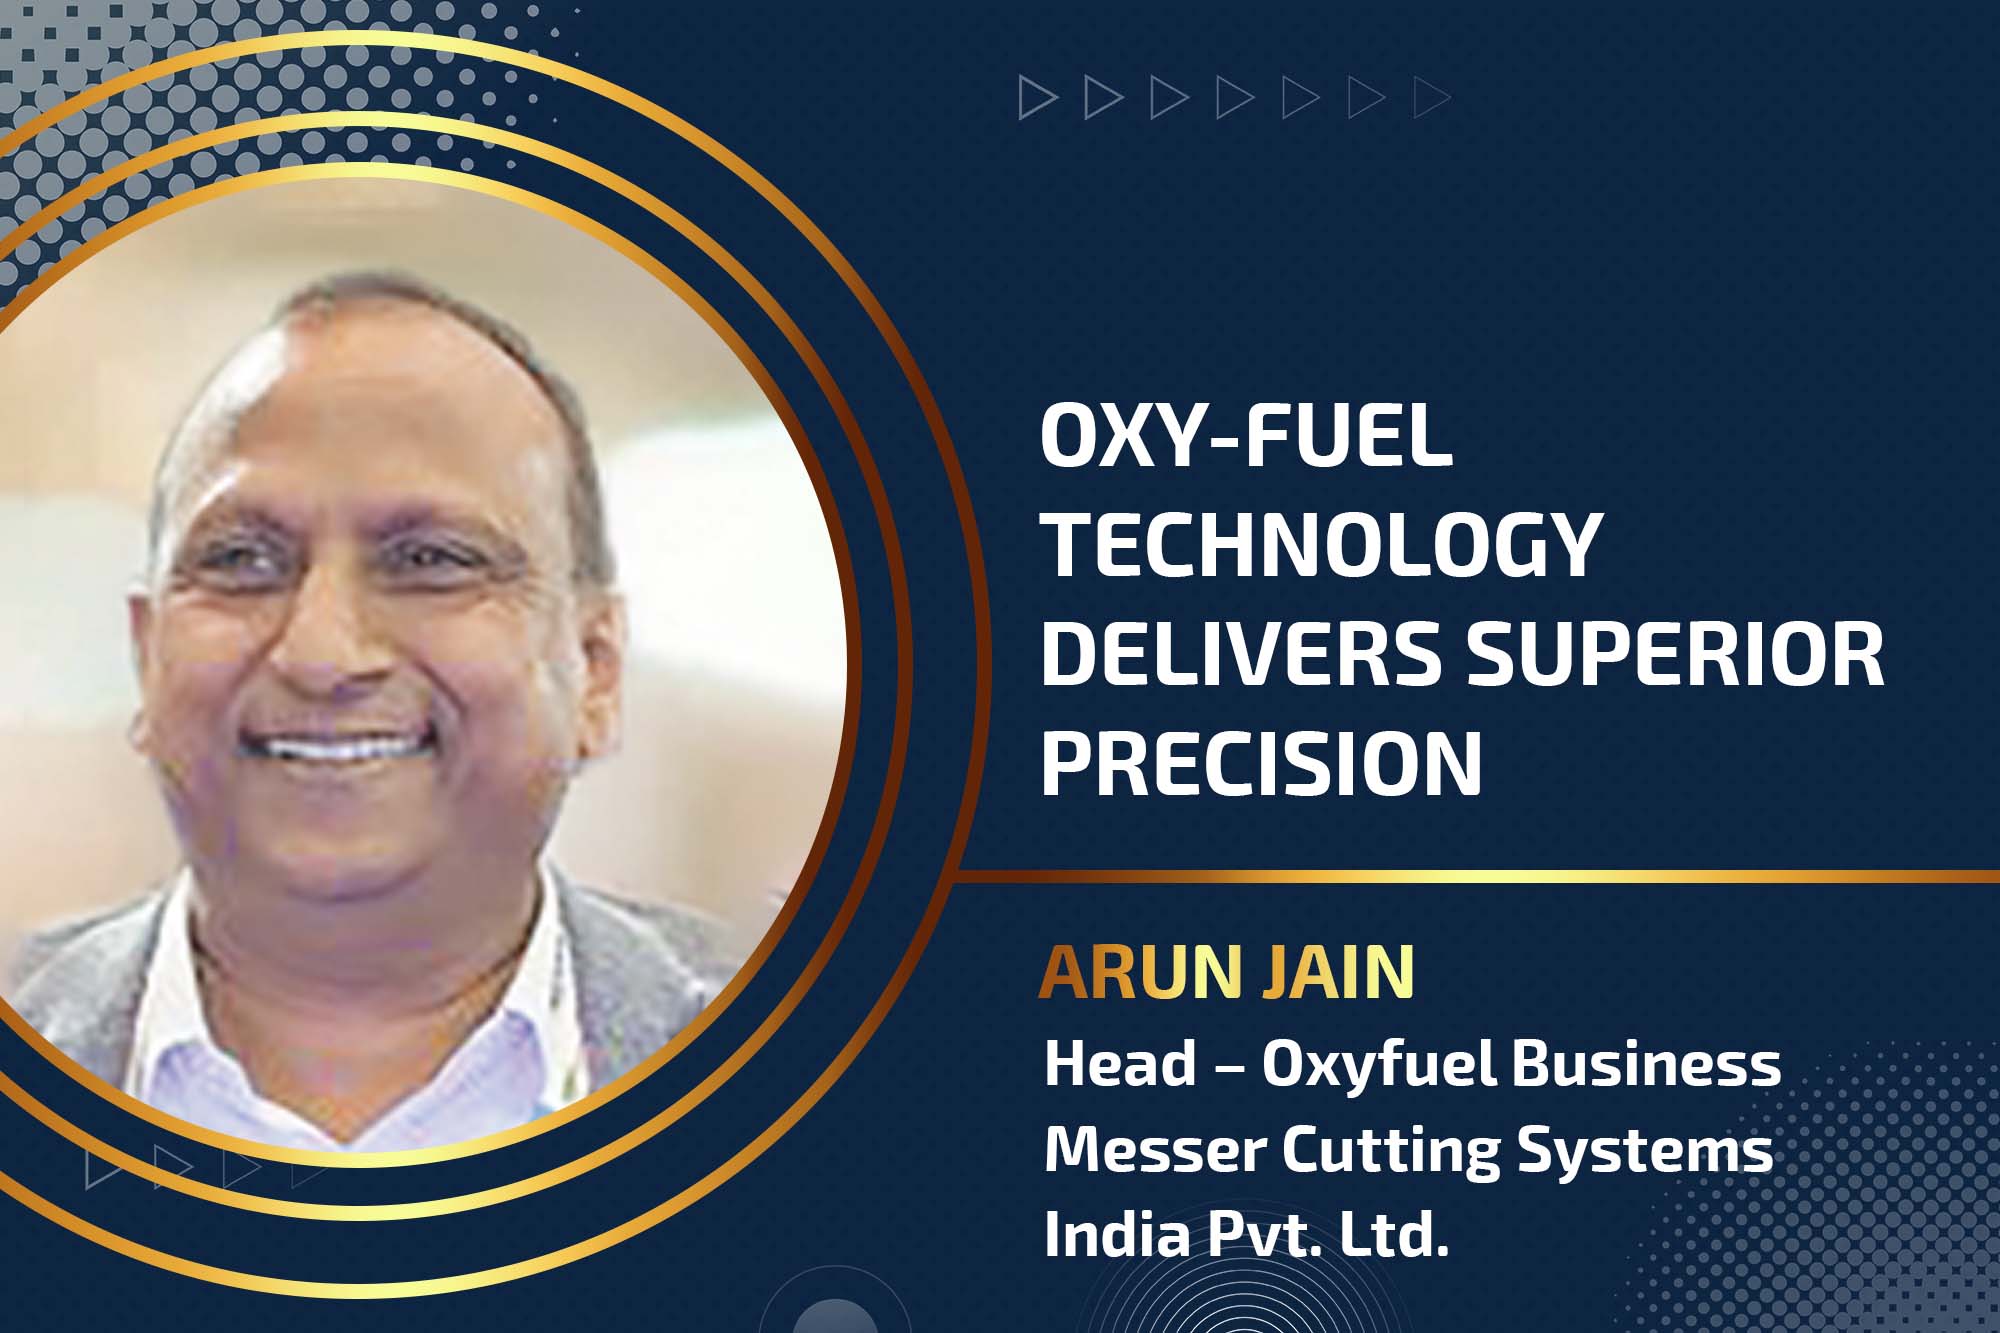 Oxy-fuel technology delivers superior precision 